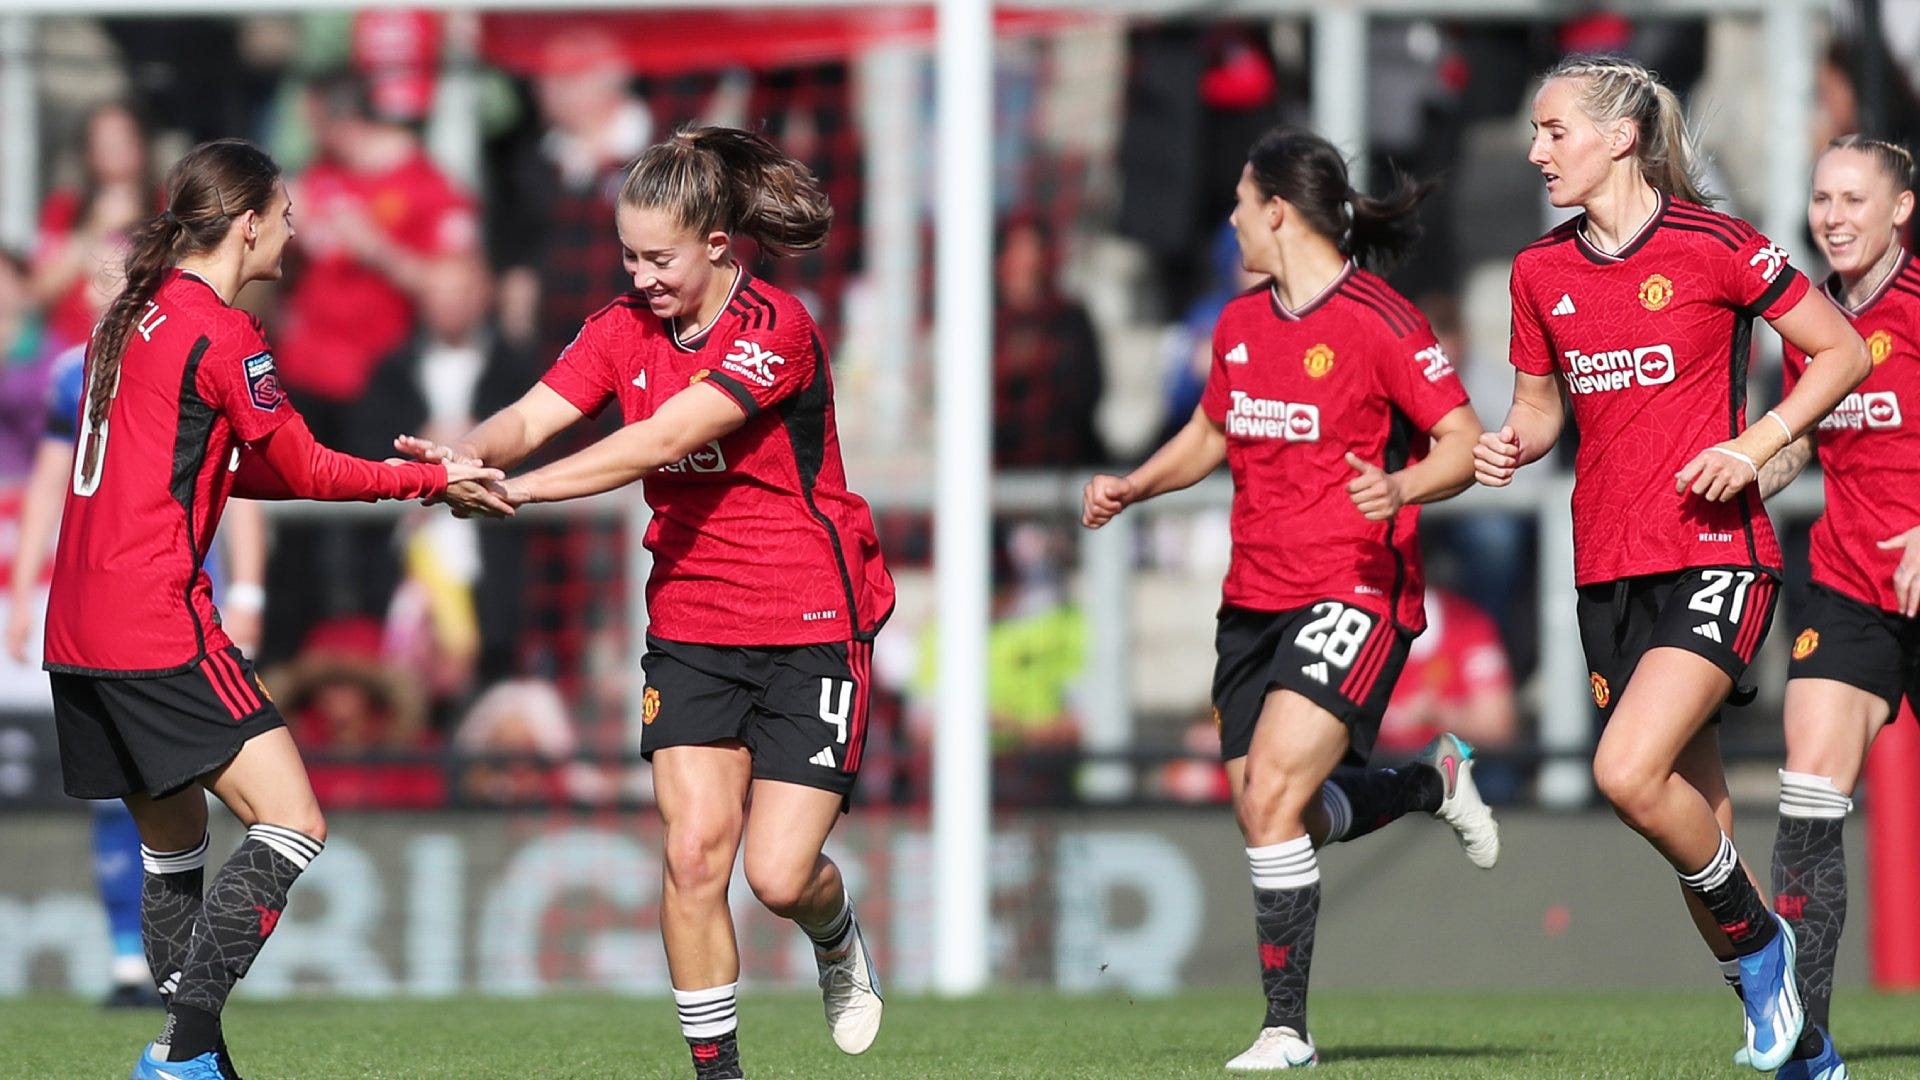 Liverpool Women vs Manchester United Women Live stream, TV channel, kick-off time and where to watch Goal US